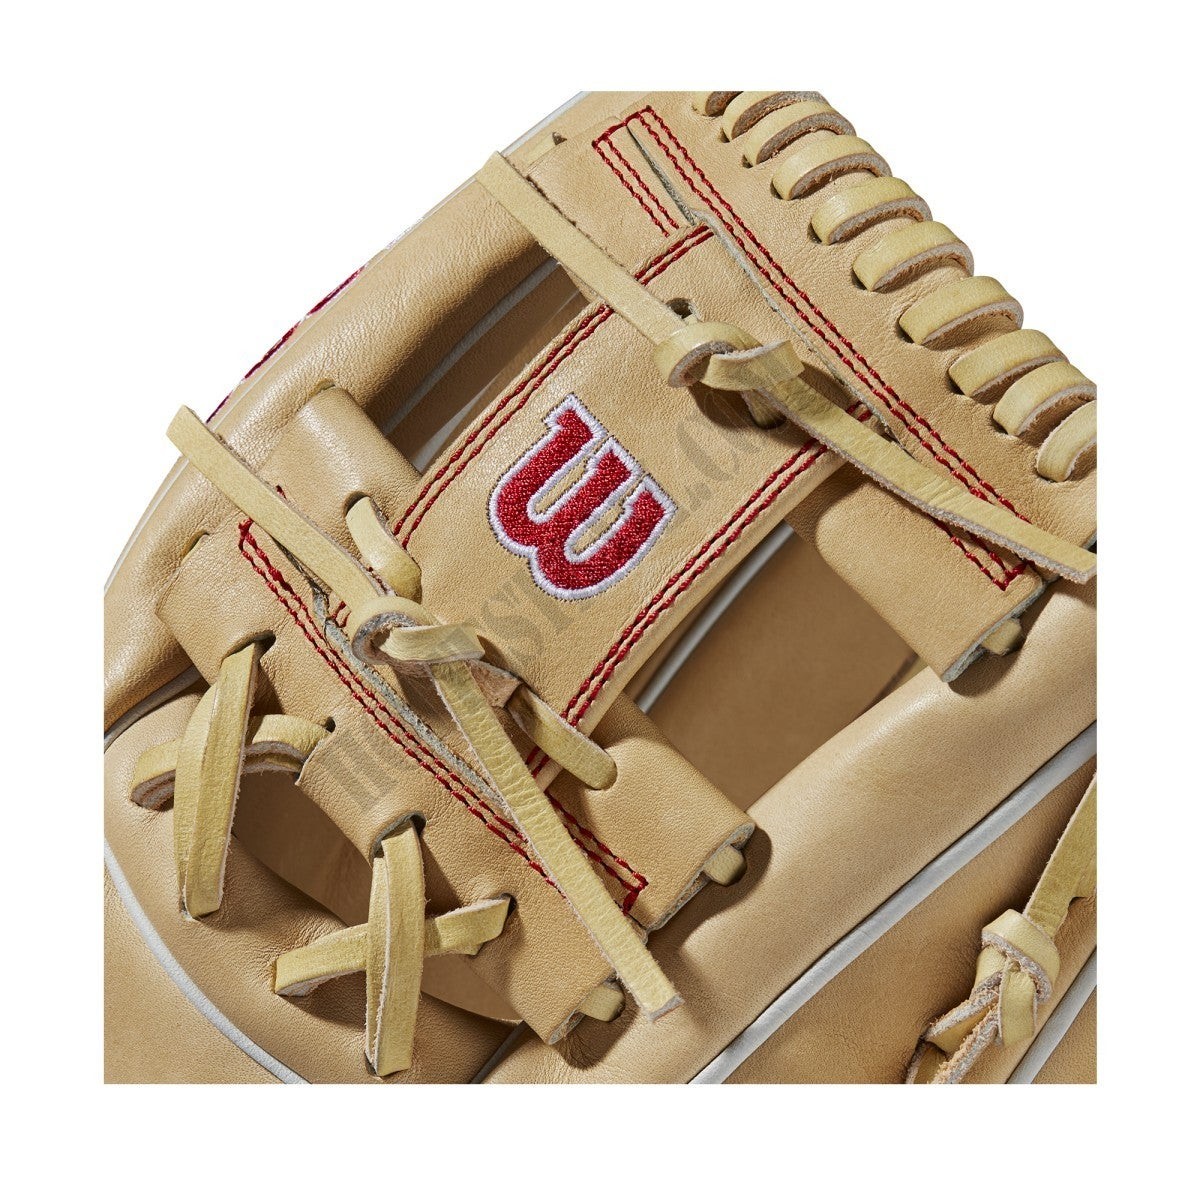 2021 A2000 1786 Bronco 11.5" Infield Baseball Glove - Right Hand Throw ● Wilson Promotions - -5